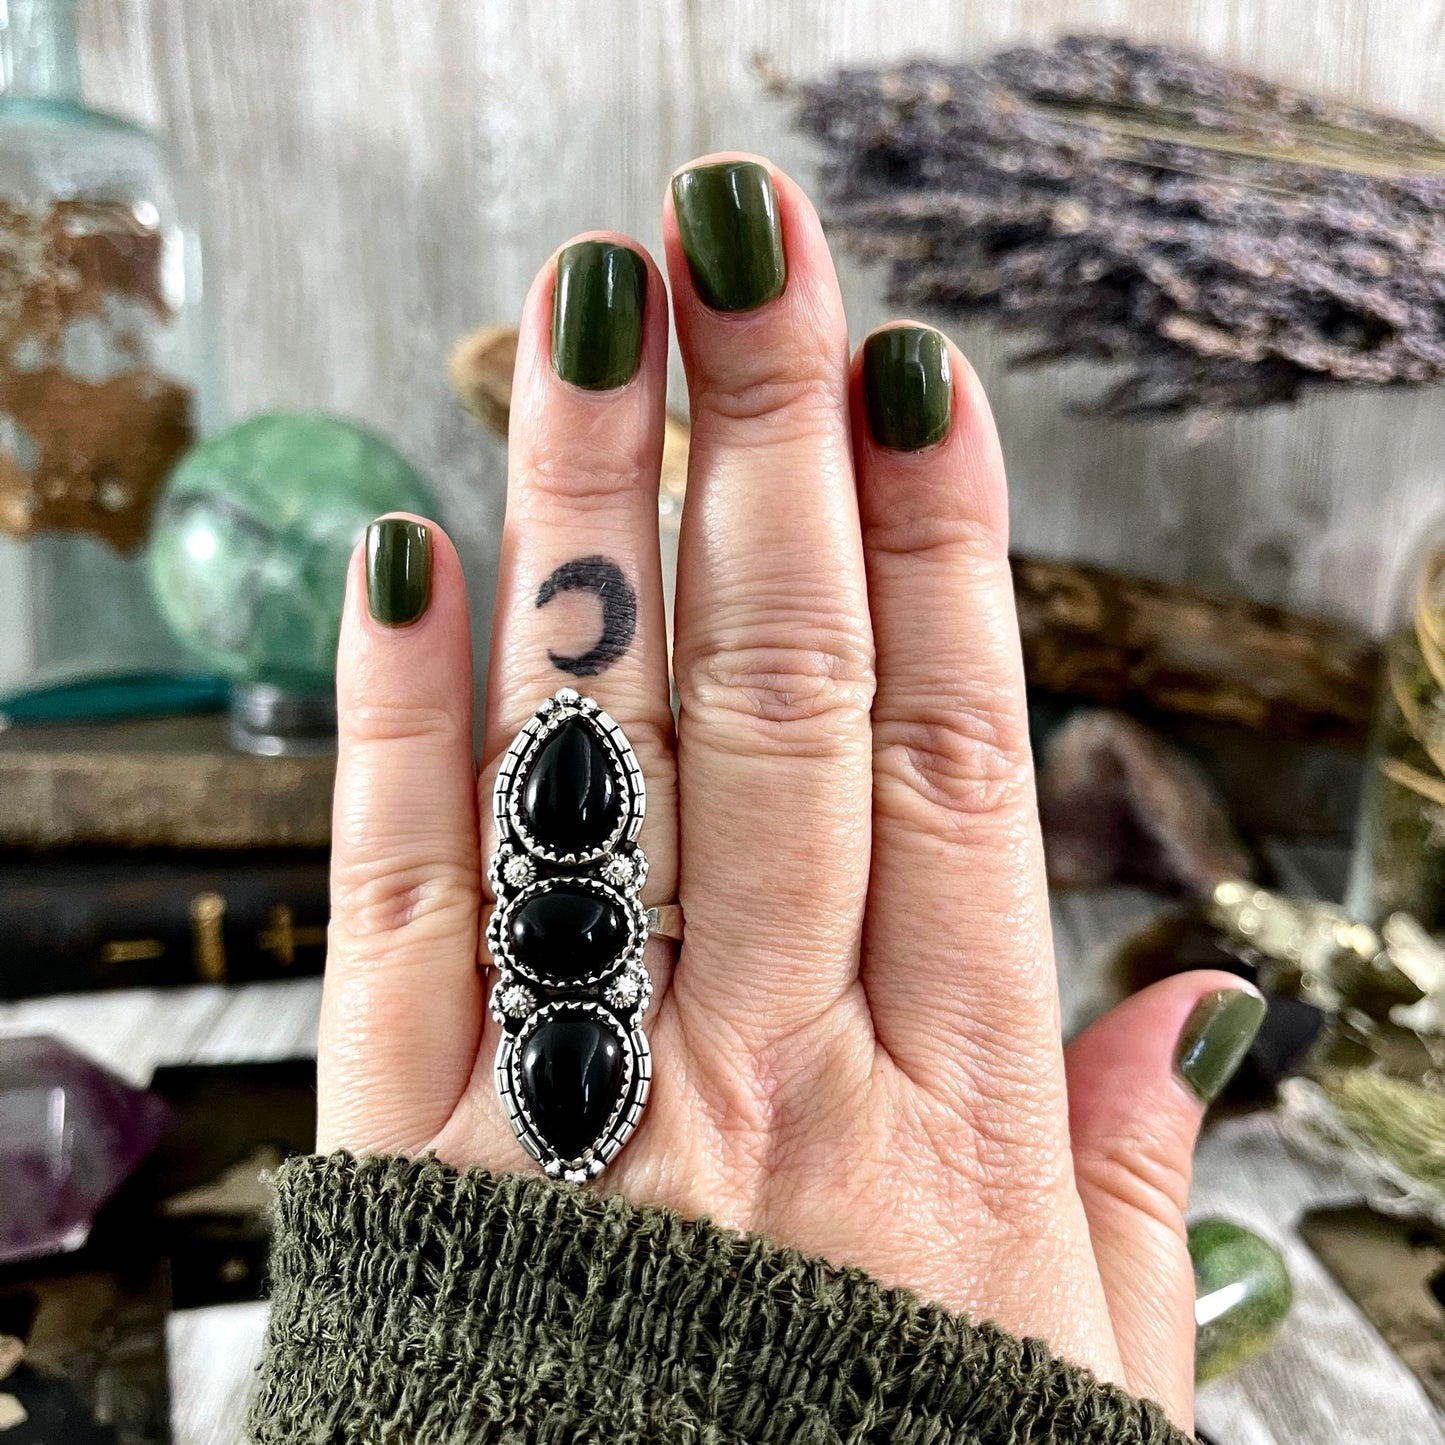 3 Stone Ring, Big Stone Ring, Black Onyx Ring, Black Stone Ring, Bohemian Ring, Boho Jewelry, Crystal Ring, Etsy Id 1078476885, Festival Jewelry, Foxlark Alchemy, Foxlark- Rings, Gift For Woman, Jewelry, Rings, Statement Rings, Wholesale